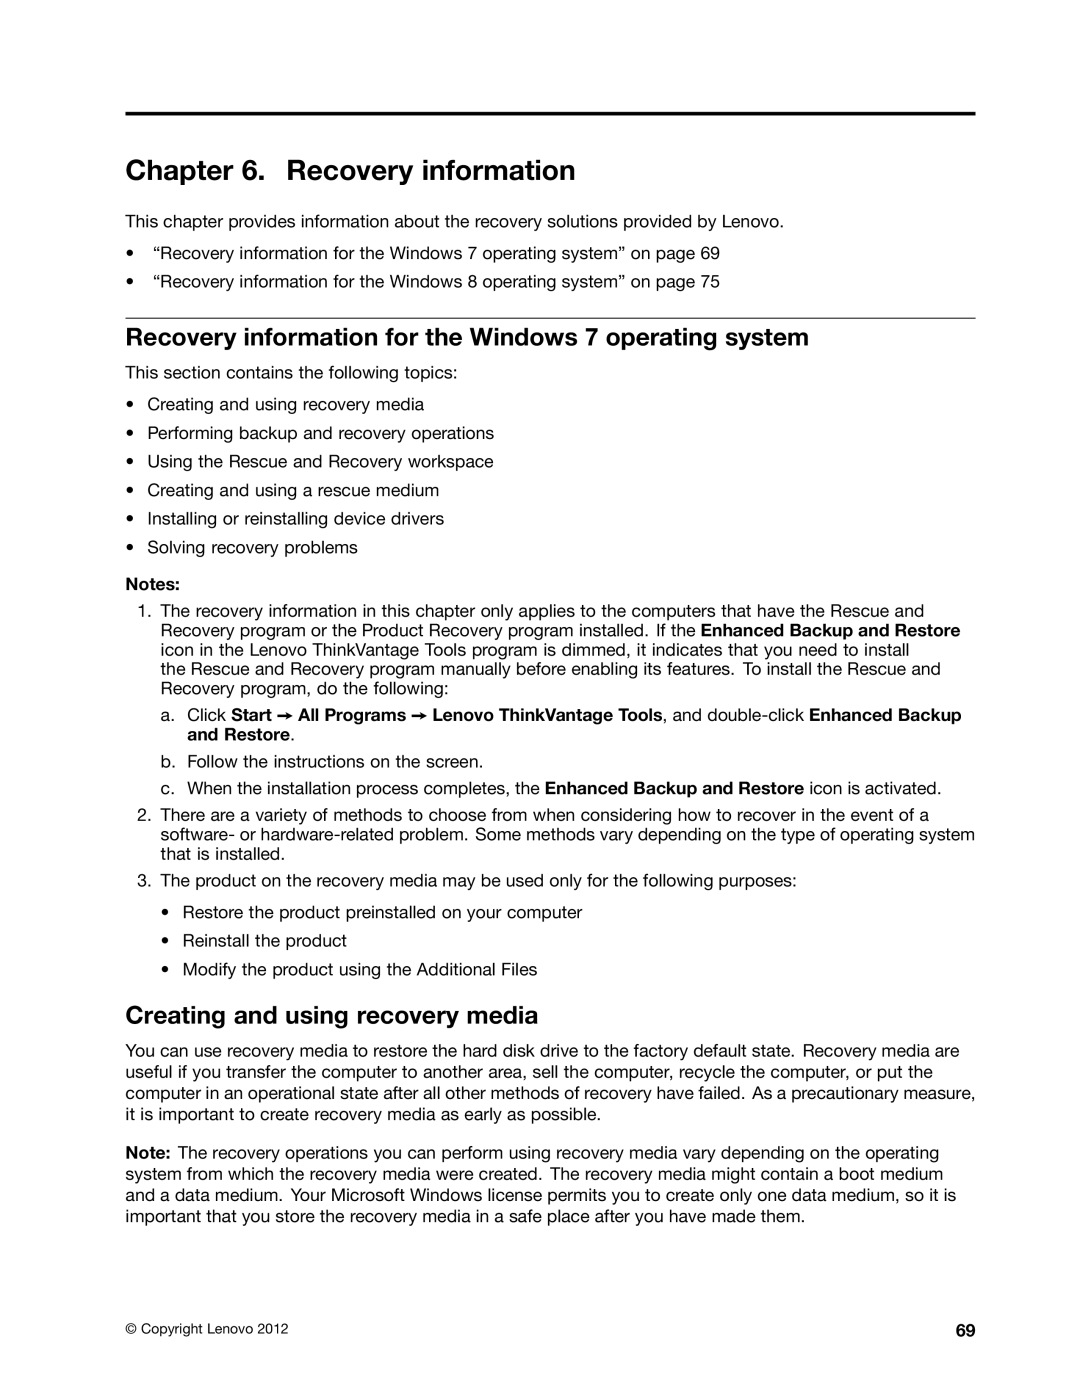 Lenovo 3496, 3493DFU manual Recovery information for the Windows 7 operating system, Creating and using recovery media 